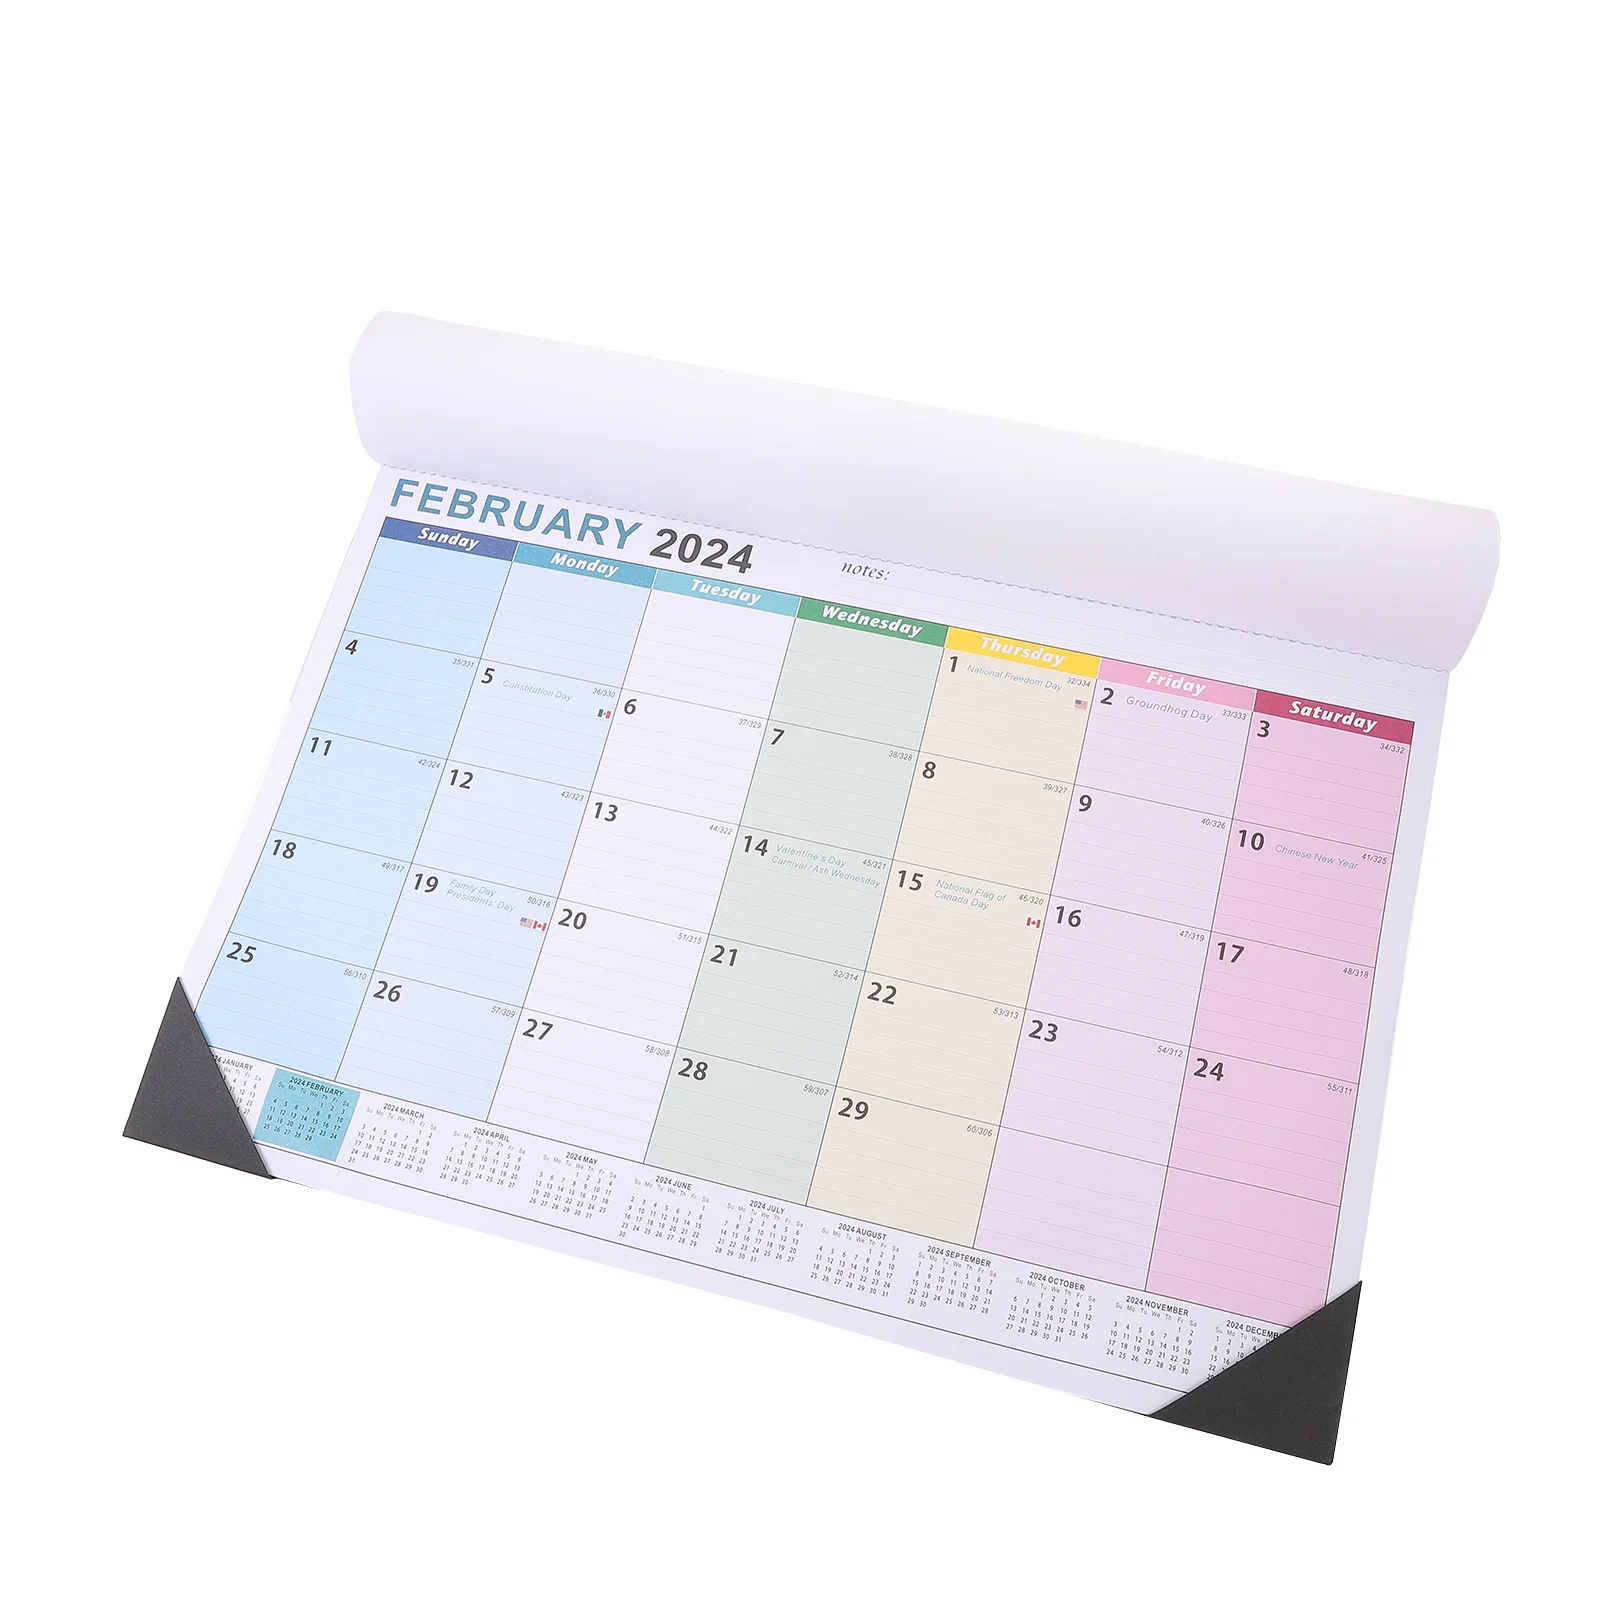 Wall Calendar Desk Calendar 2023-2024 Desk Calendar Planner Calendar Desk Calendar for Plan Office Home jojofuny monthly page stickers sticker labels decorative labels 2023 2024 month stickers calendar planner stickers monthly